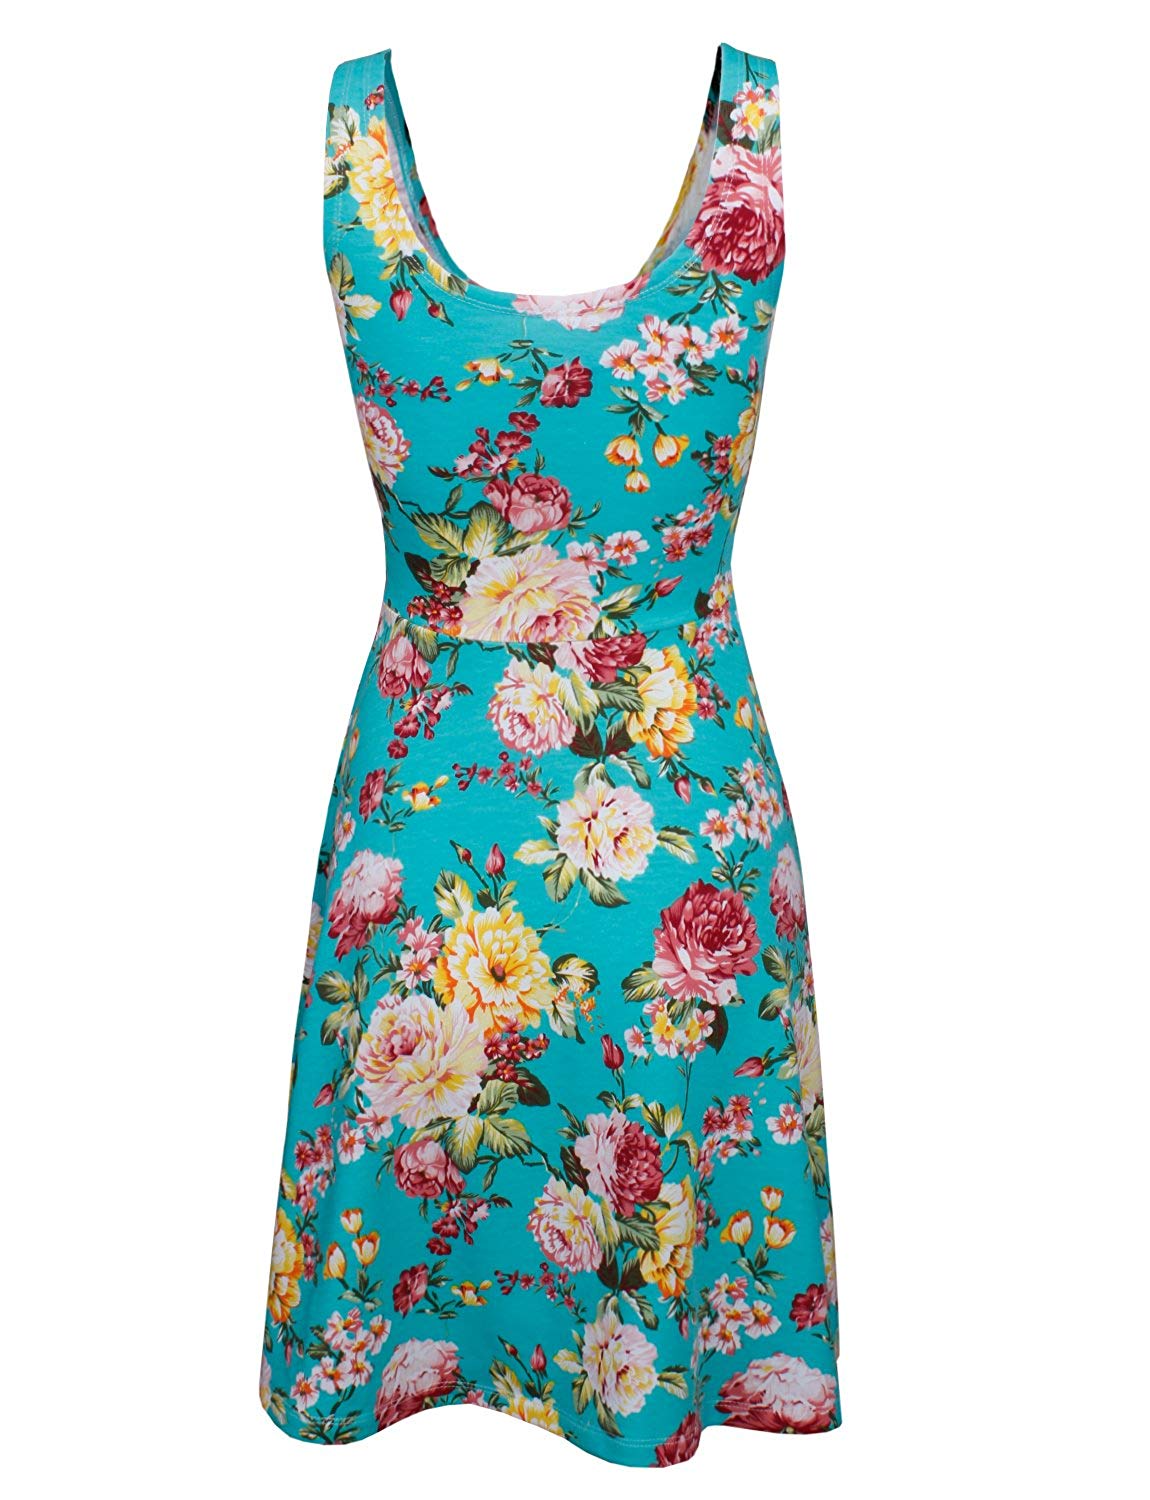 Ladies Green Floral Print Dress – Casual Sleeveless Outfit – Fit And ...